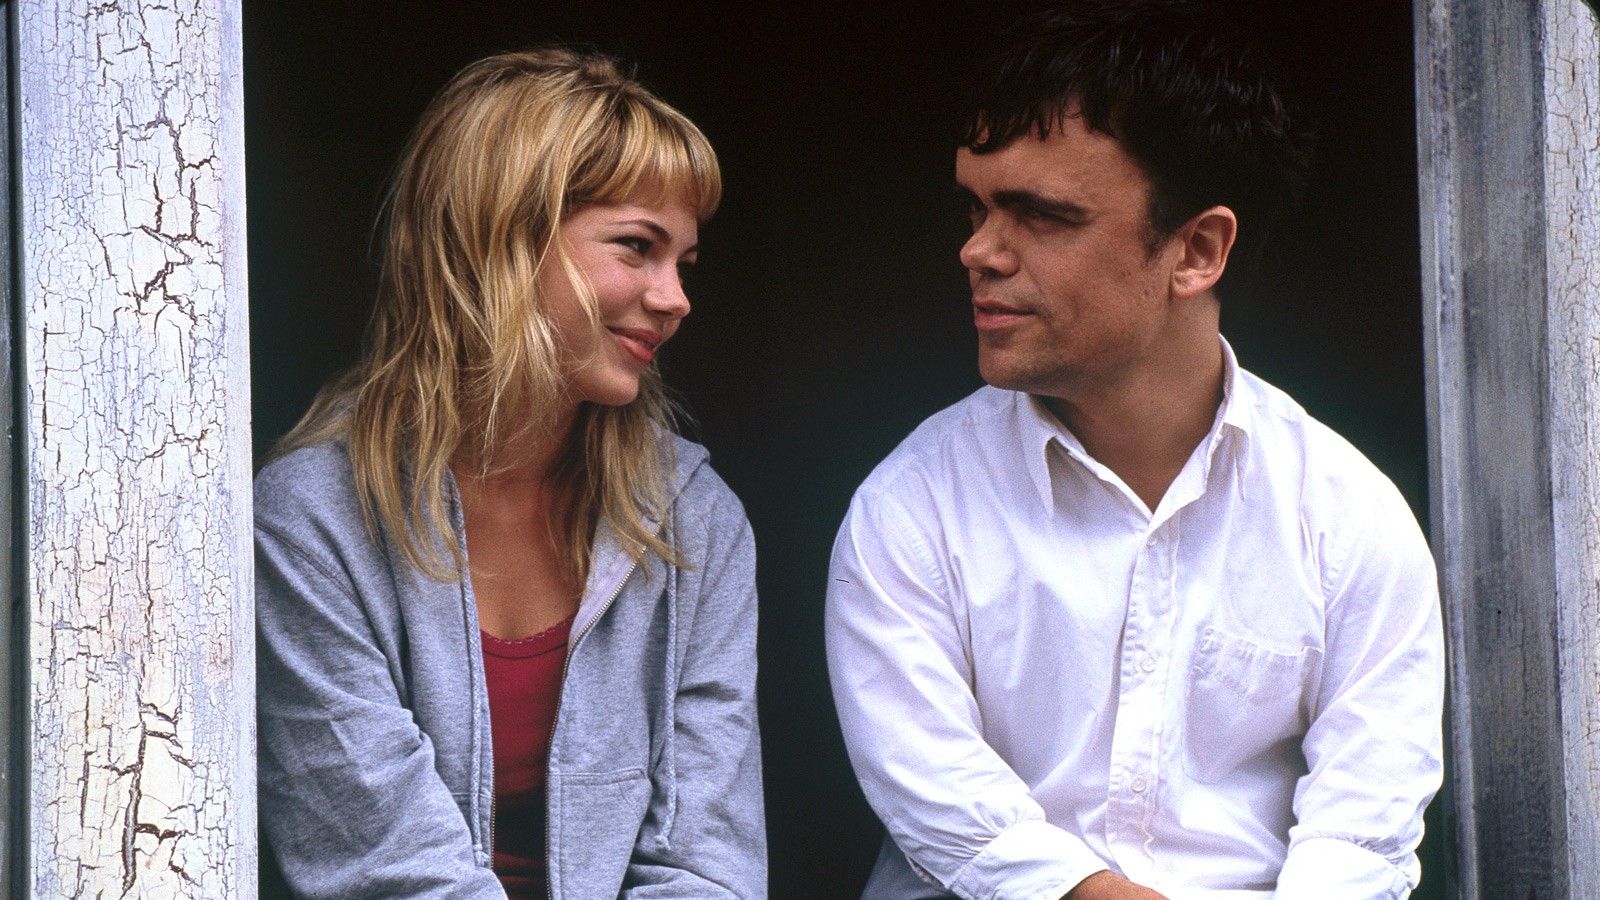 Peter Dinklage and Michelle Williams in The Station Agent 